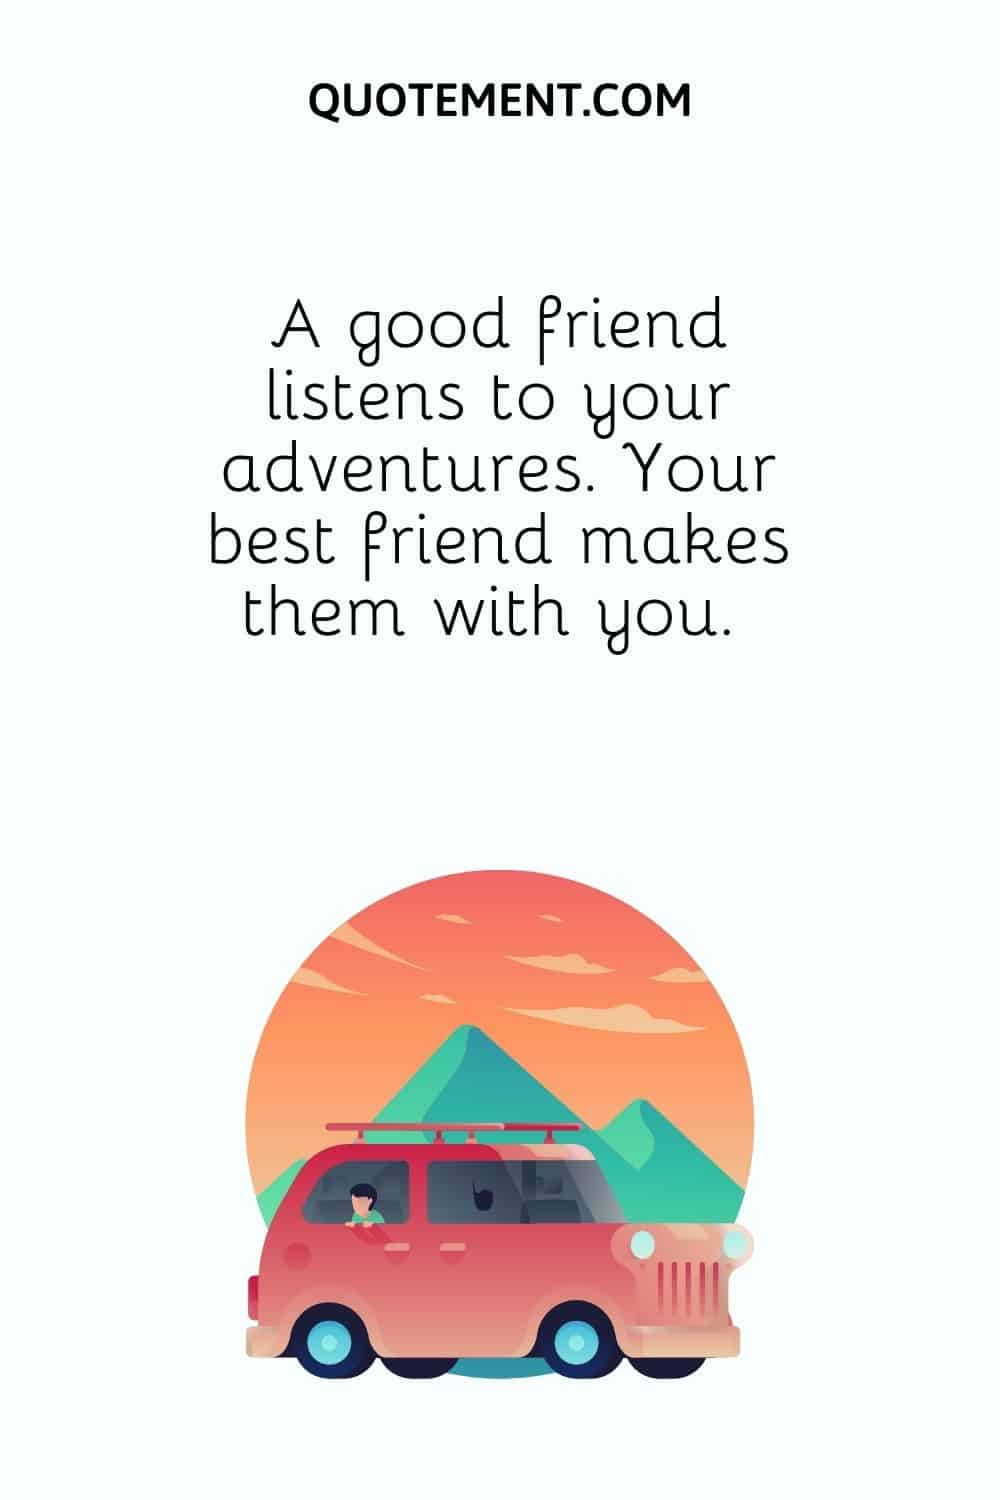 A good friend listens to your adventures